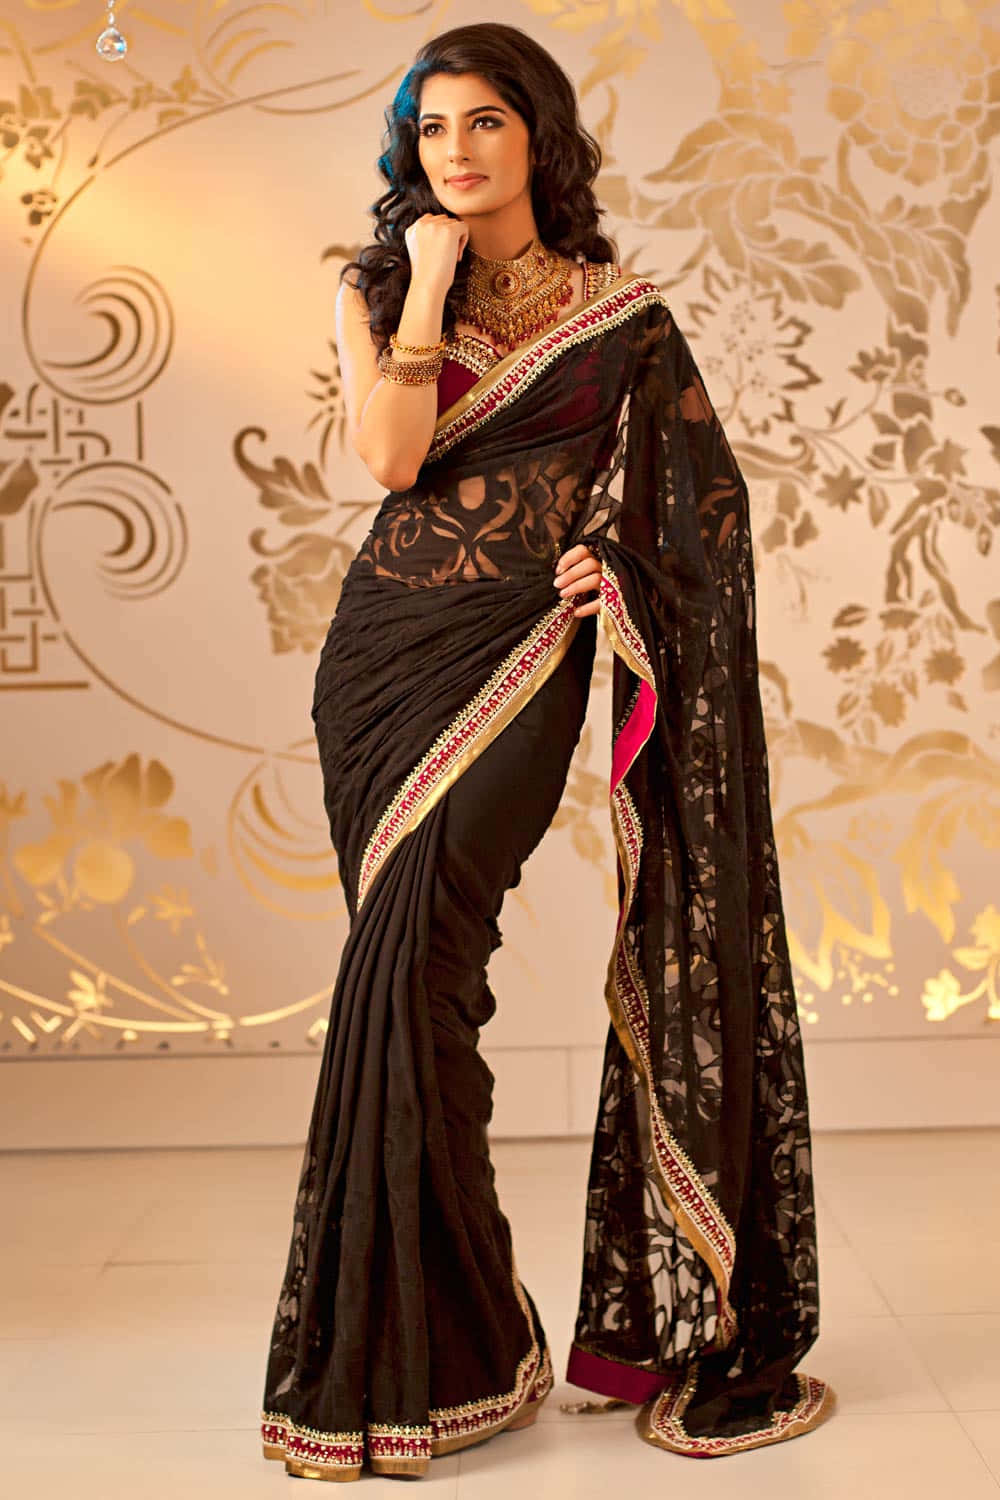 Black Sari With Gold Embroidery